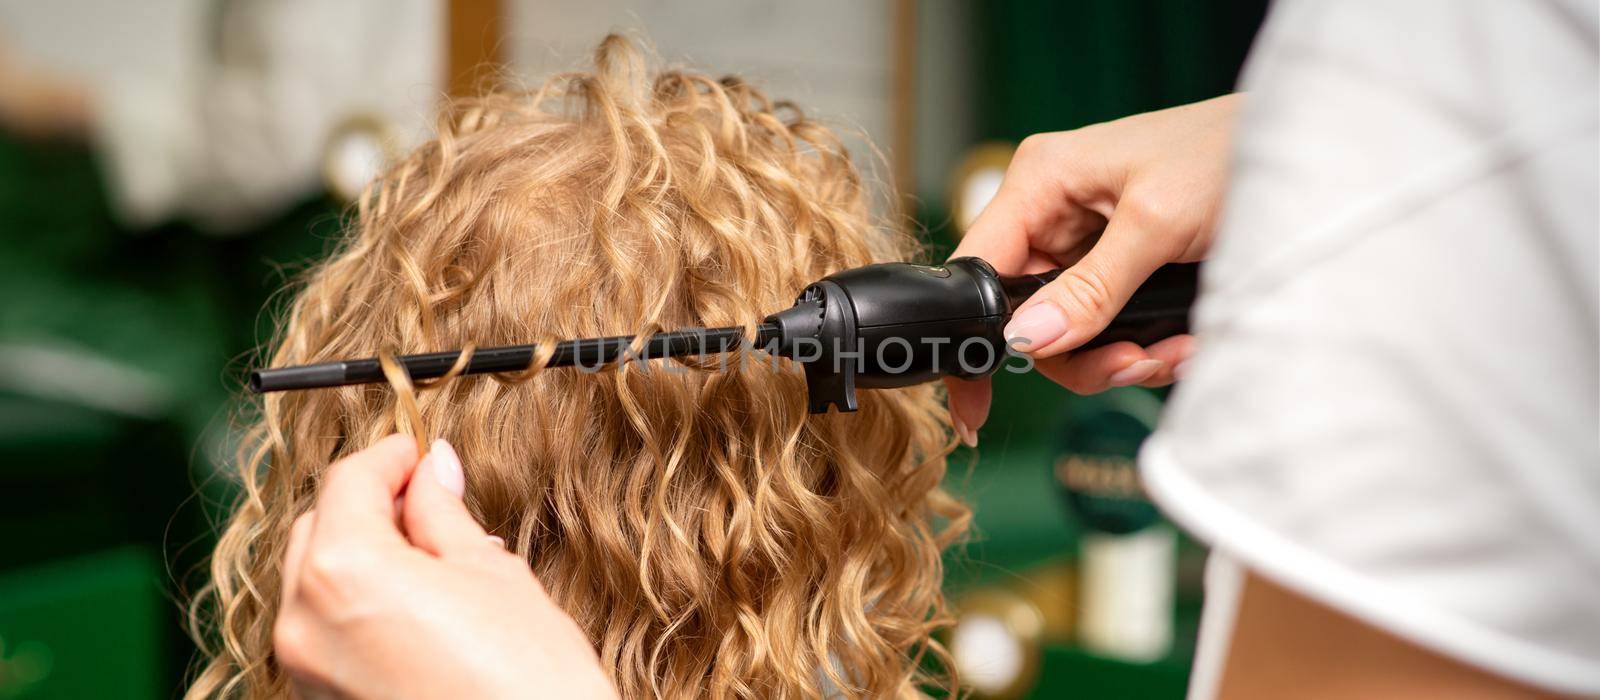 Hands of hairstylist curl wavy hair of young woman using a curling iron for hair curls in the beauty salon rear view. by okskukuruza